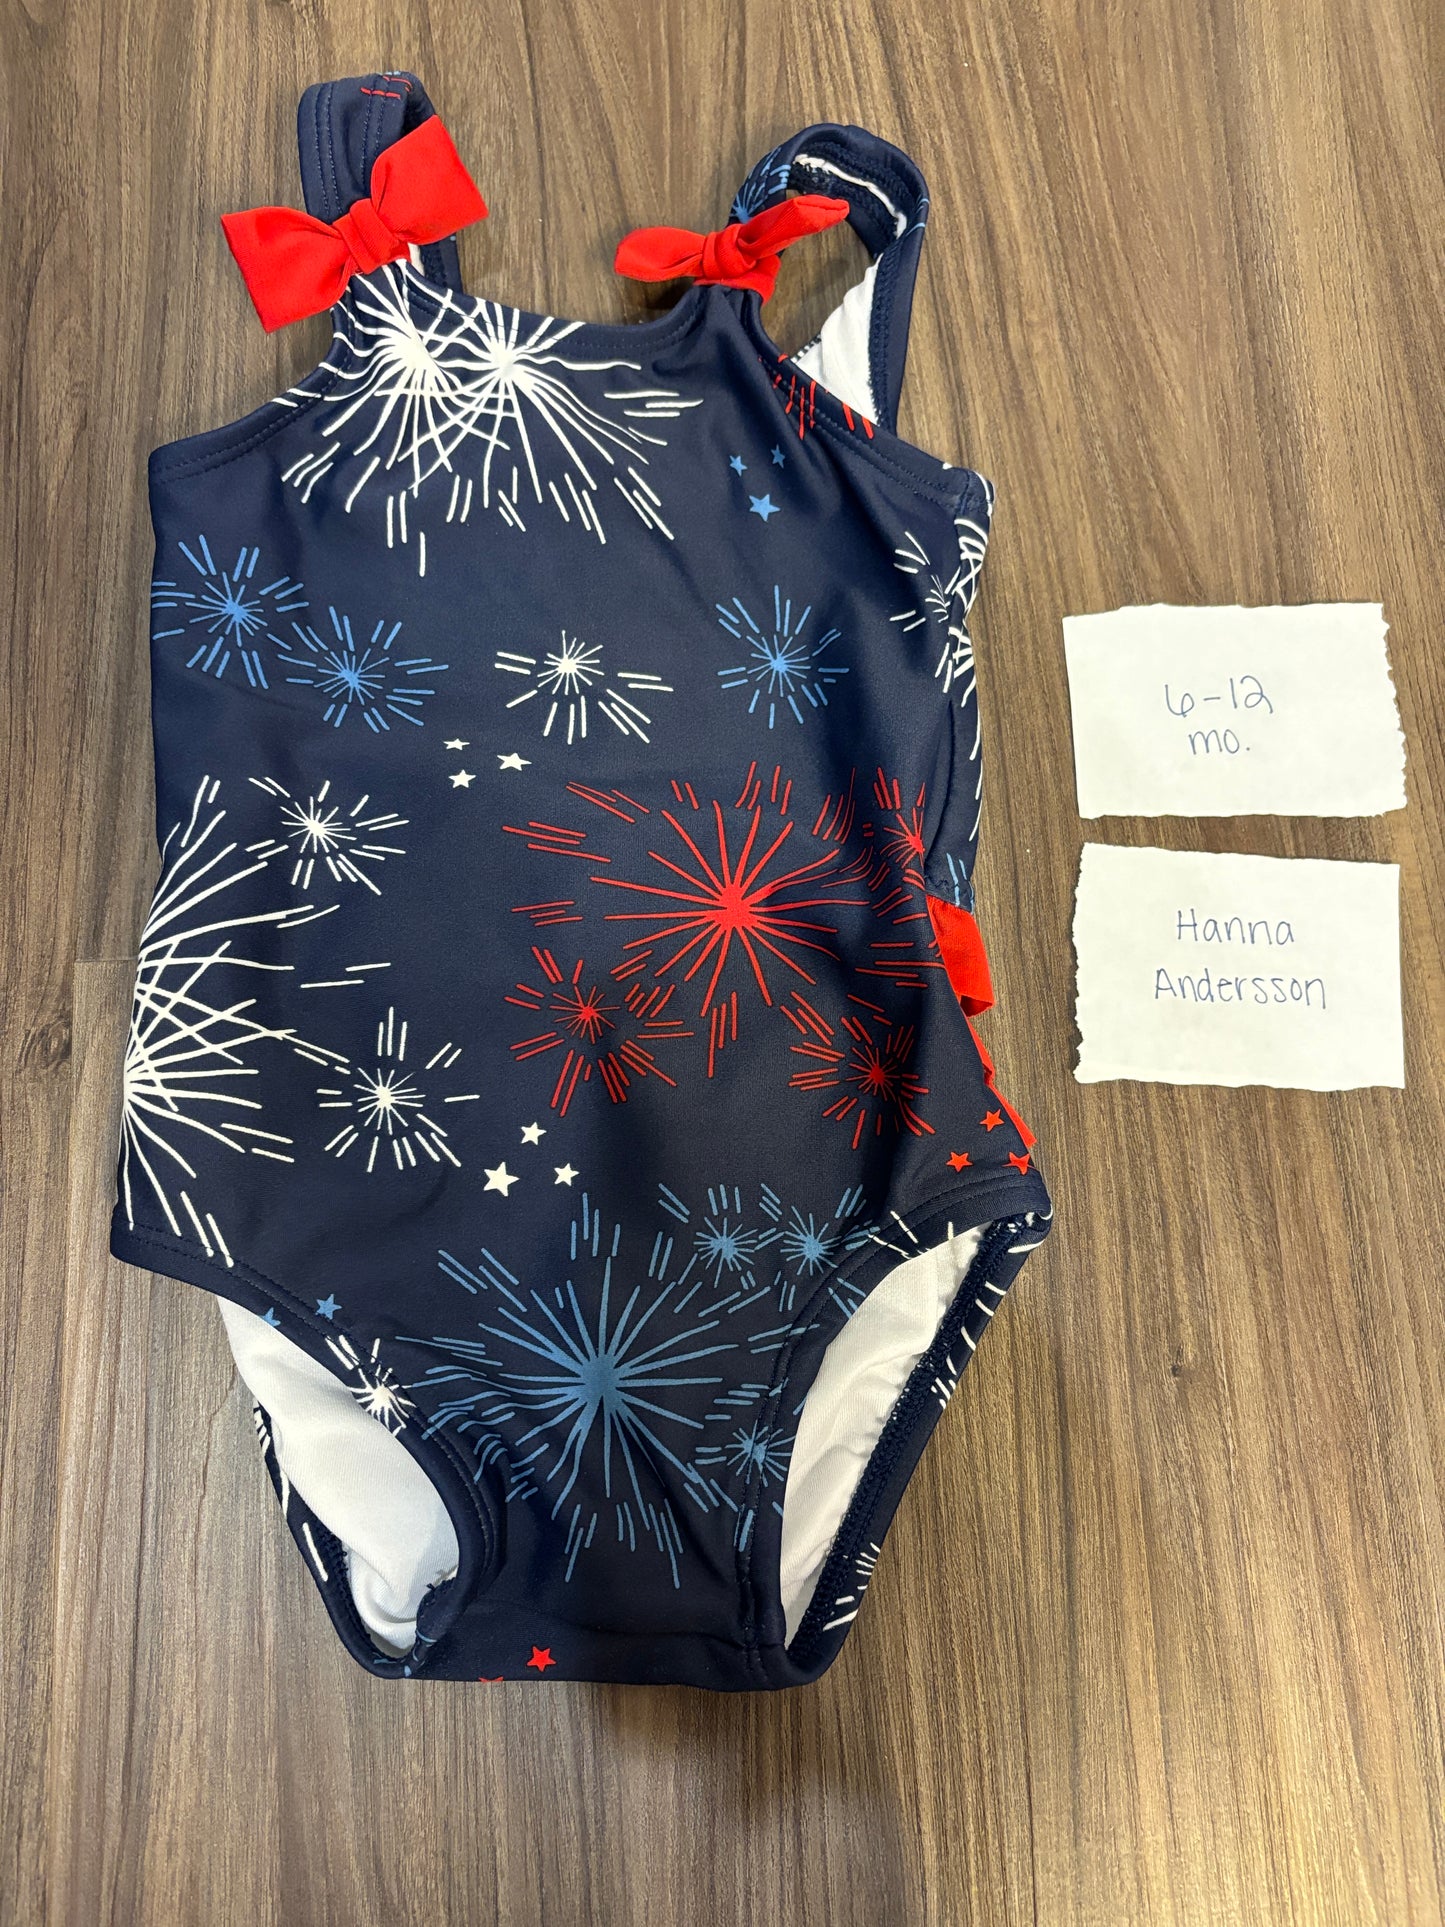 6-12 Mo - Hanna Andersson - Fireworks Swimsuit - PU 45236 (near Kenwood) Except Semiannual Sale